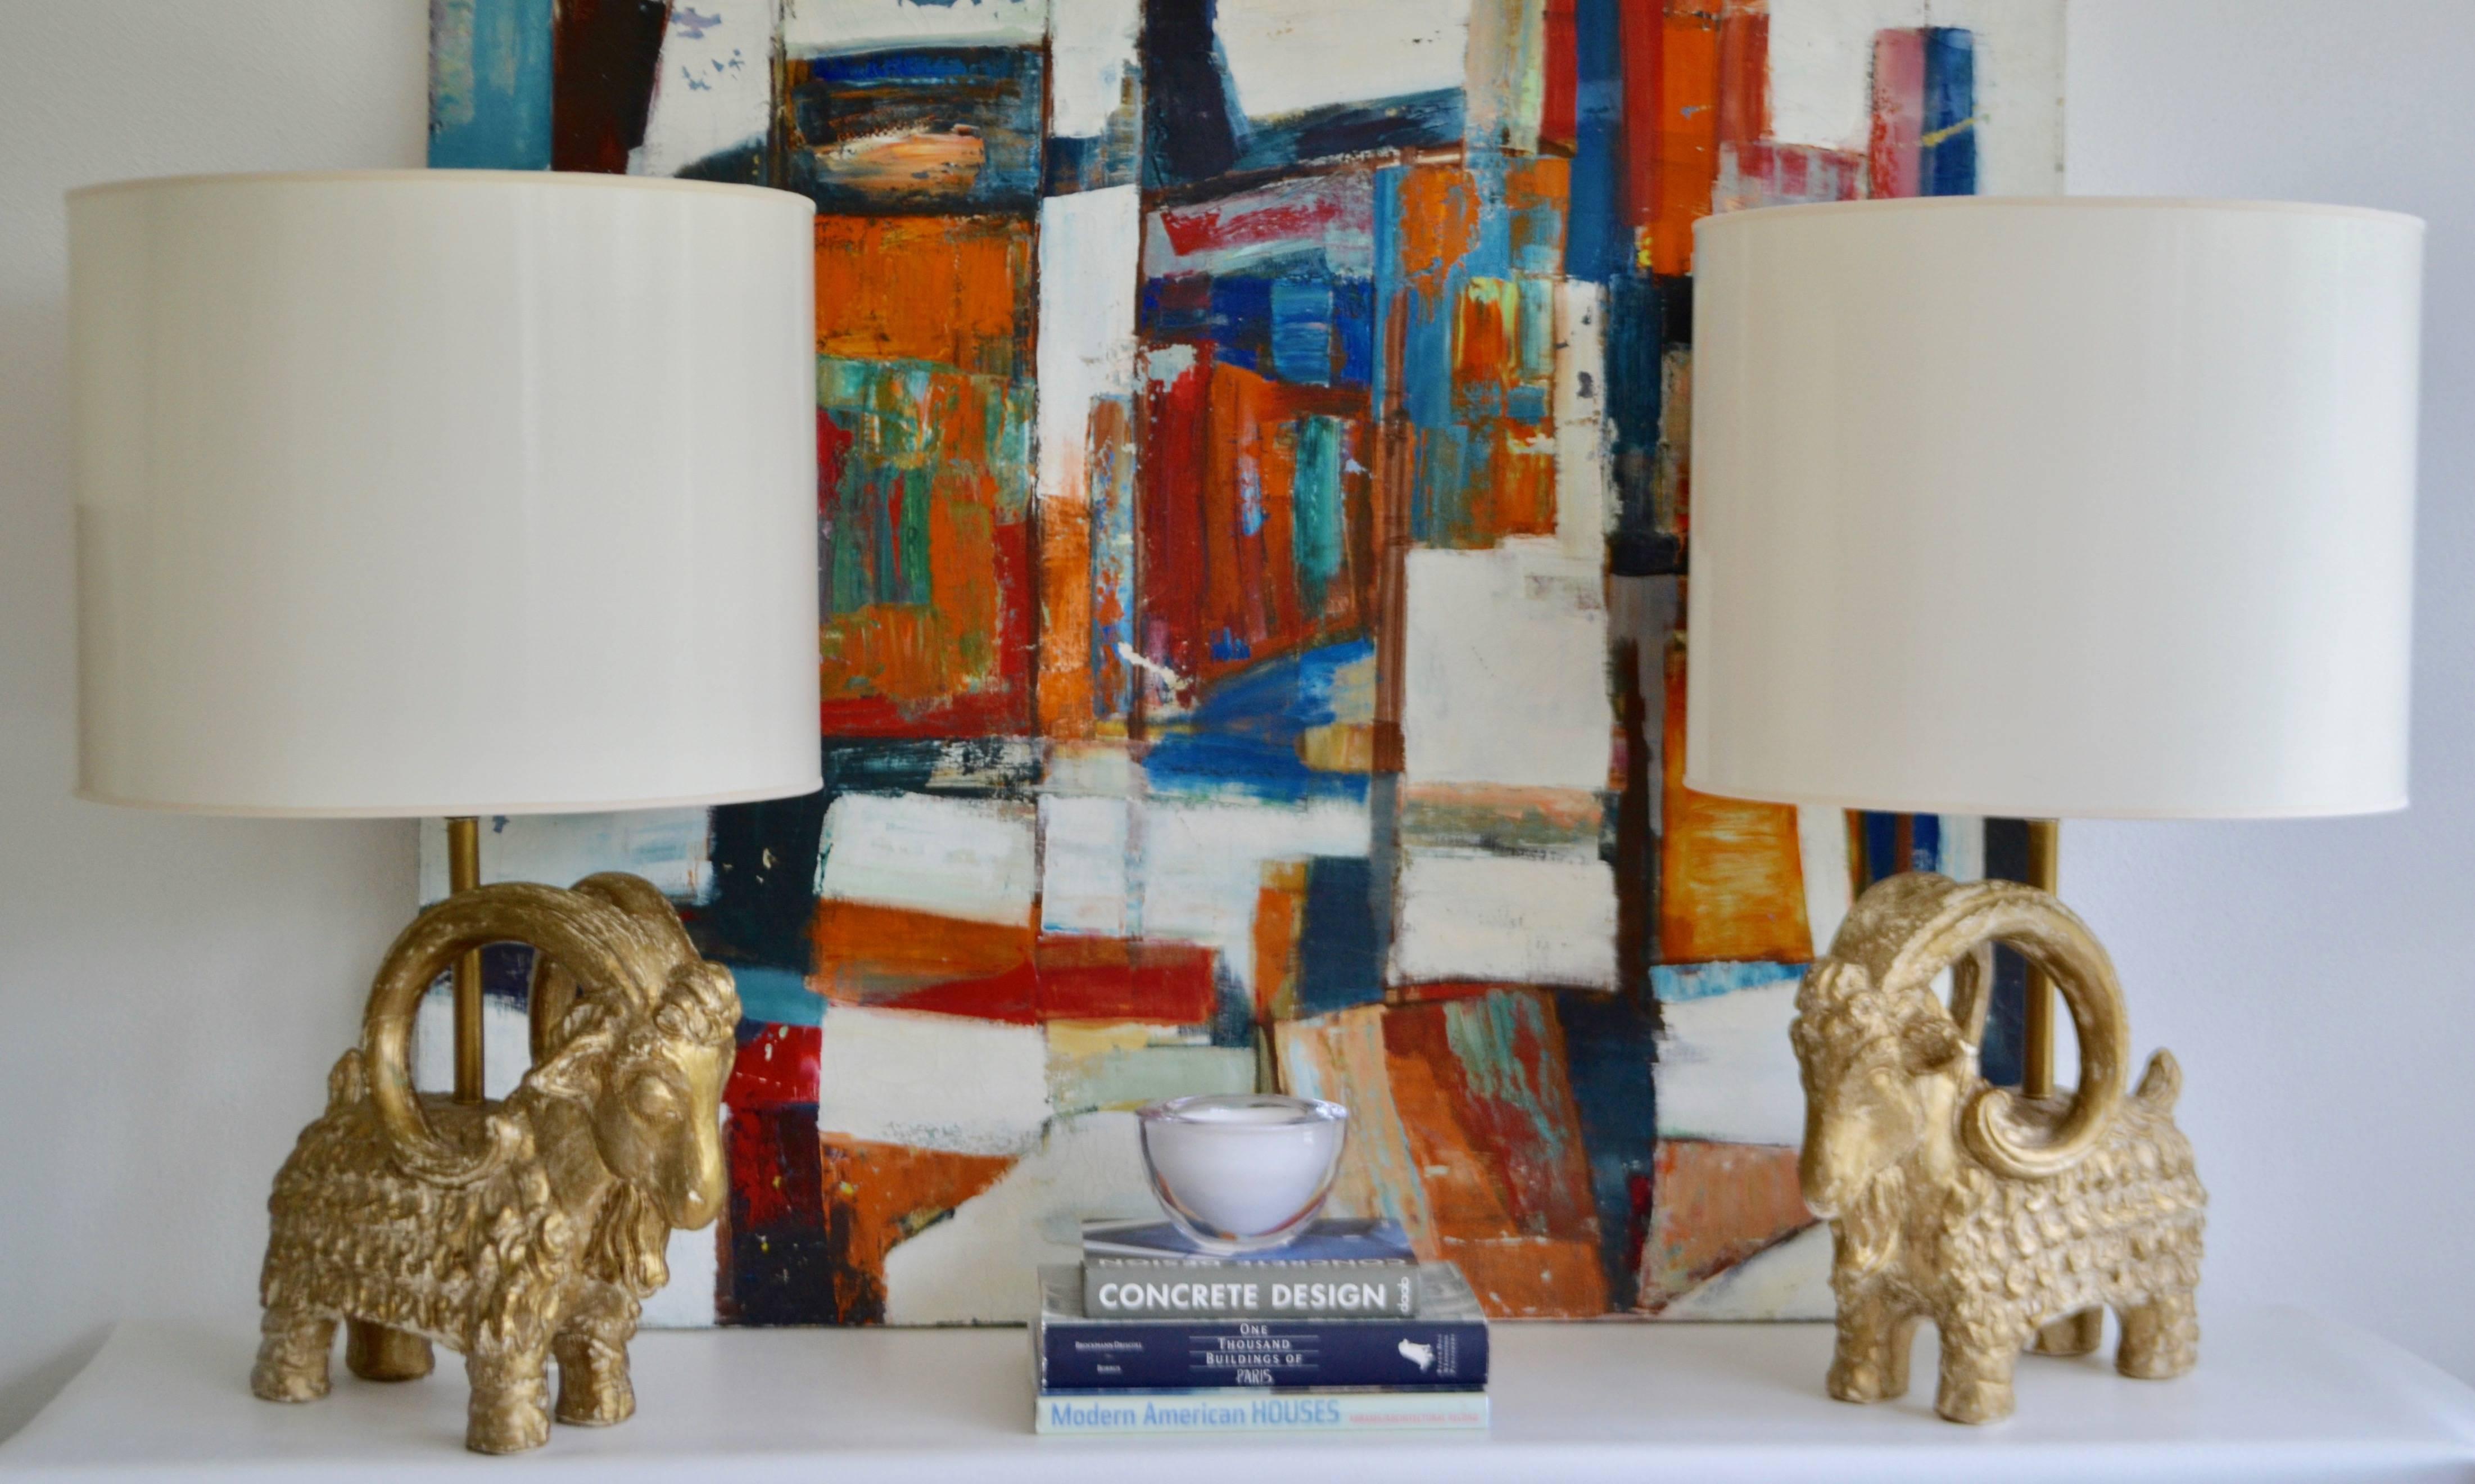 Striking pair of midcentury gilt plaster ram form table lamps, circa 1950s-1960s. Shades not included.
Measurements:
Overall 28.5